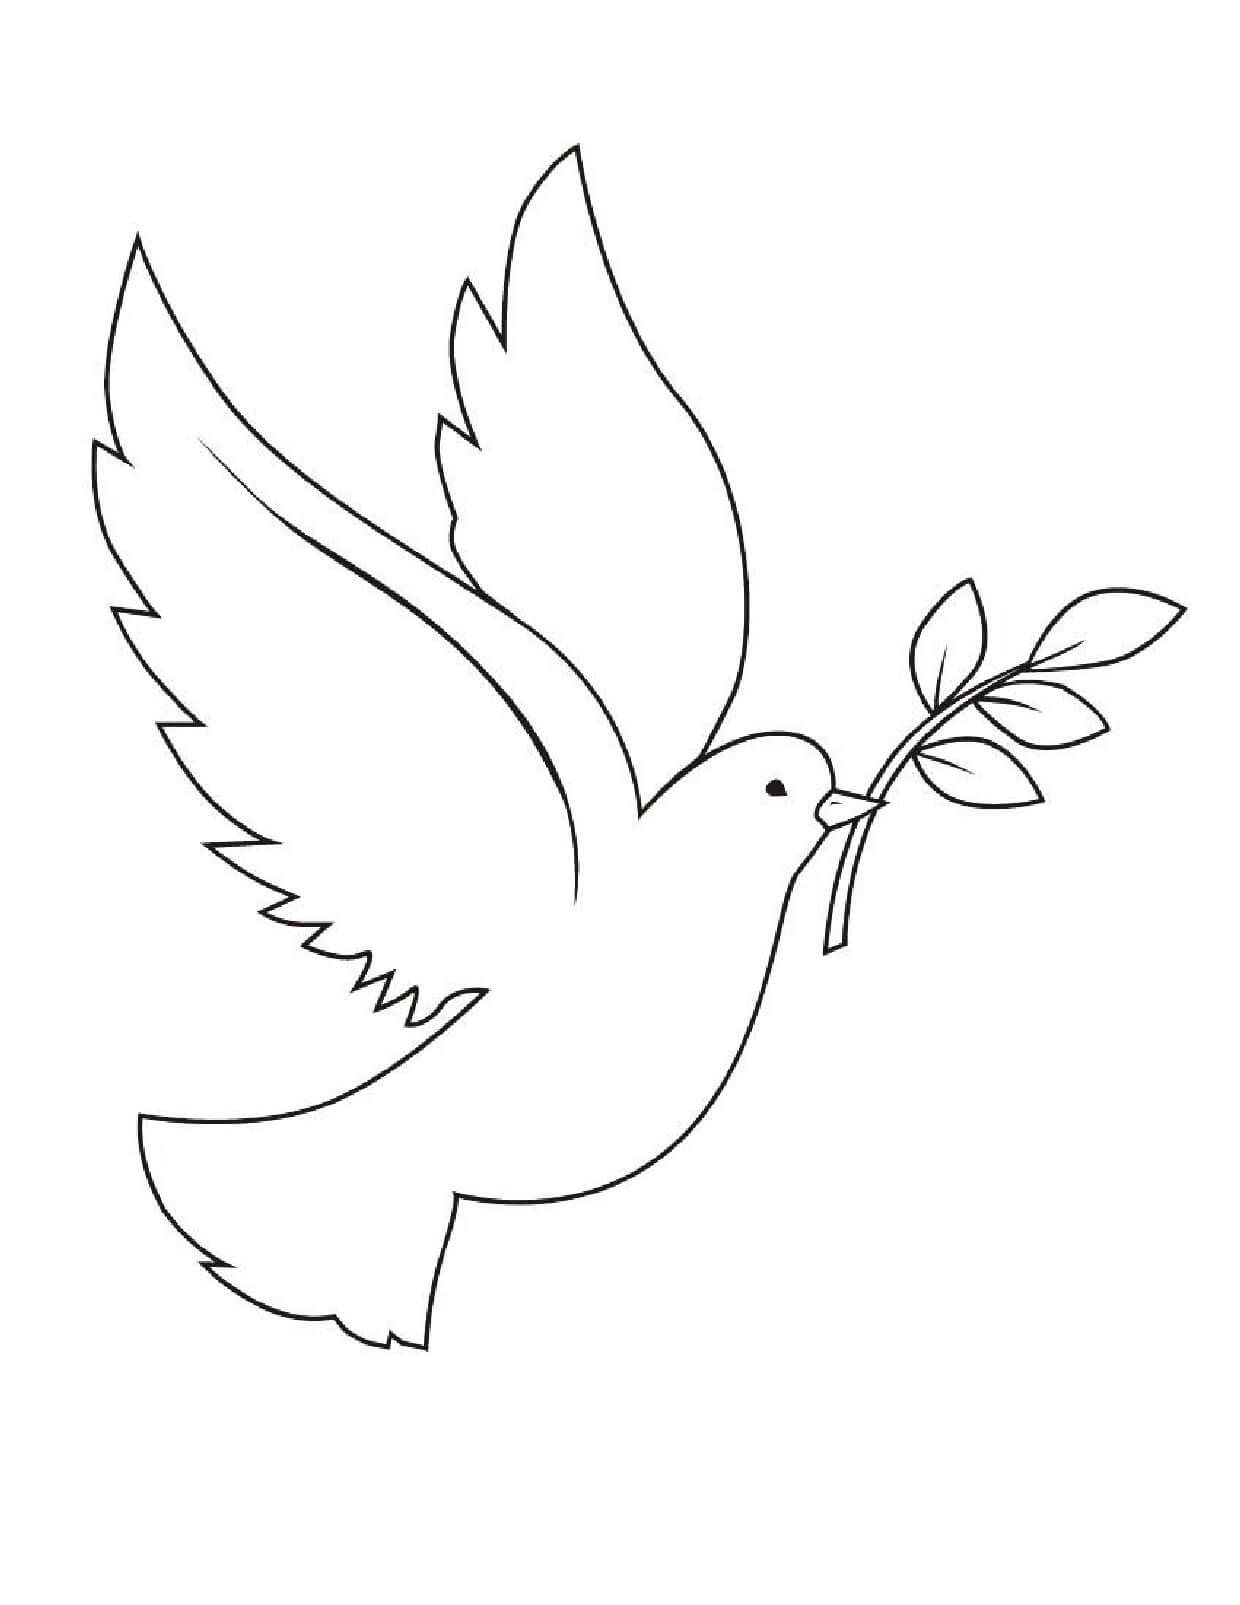 Paloma coloring pages